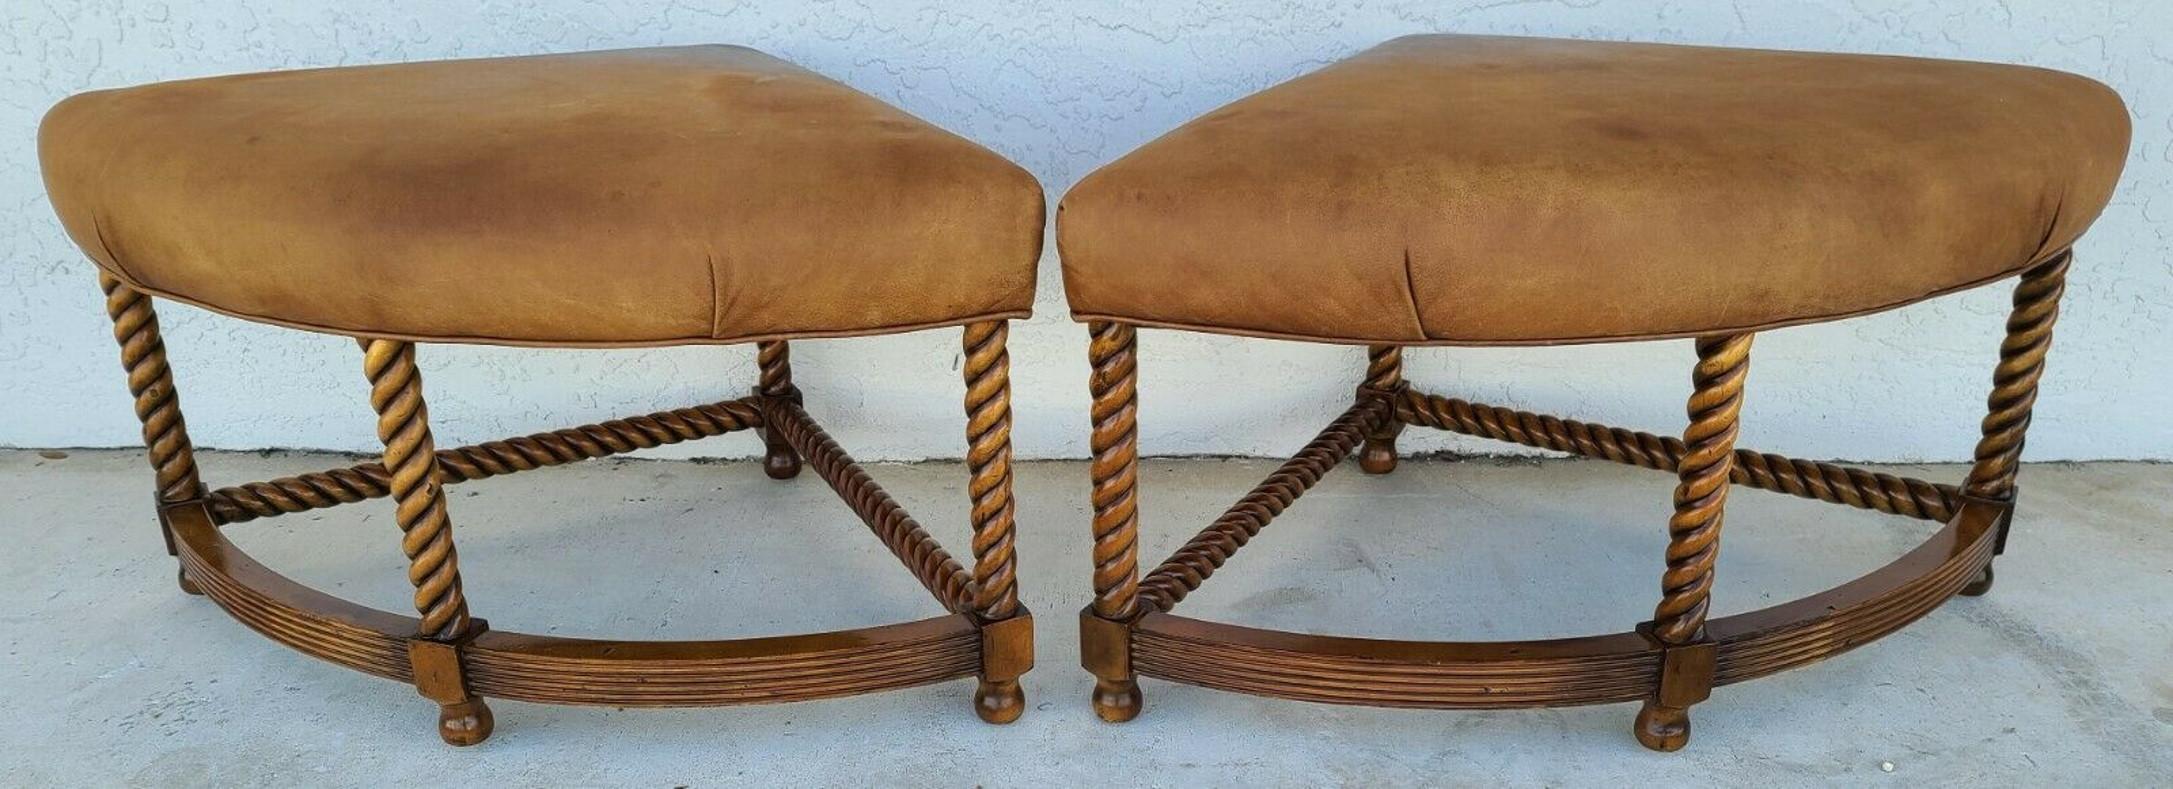 French Boho Sectional Ottoman Barley Twist Leather Foot Stools  2